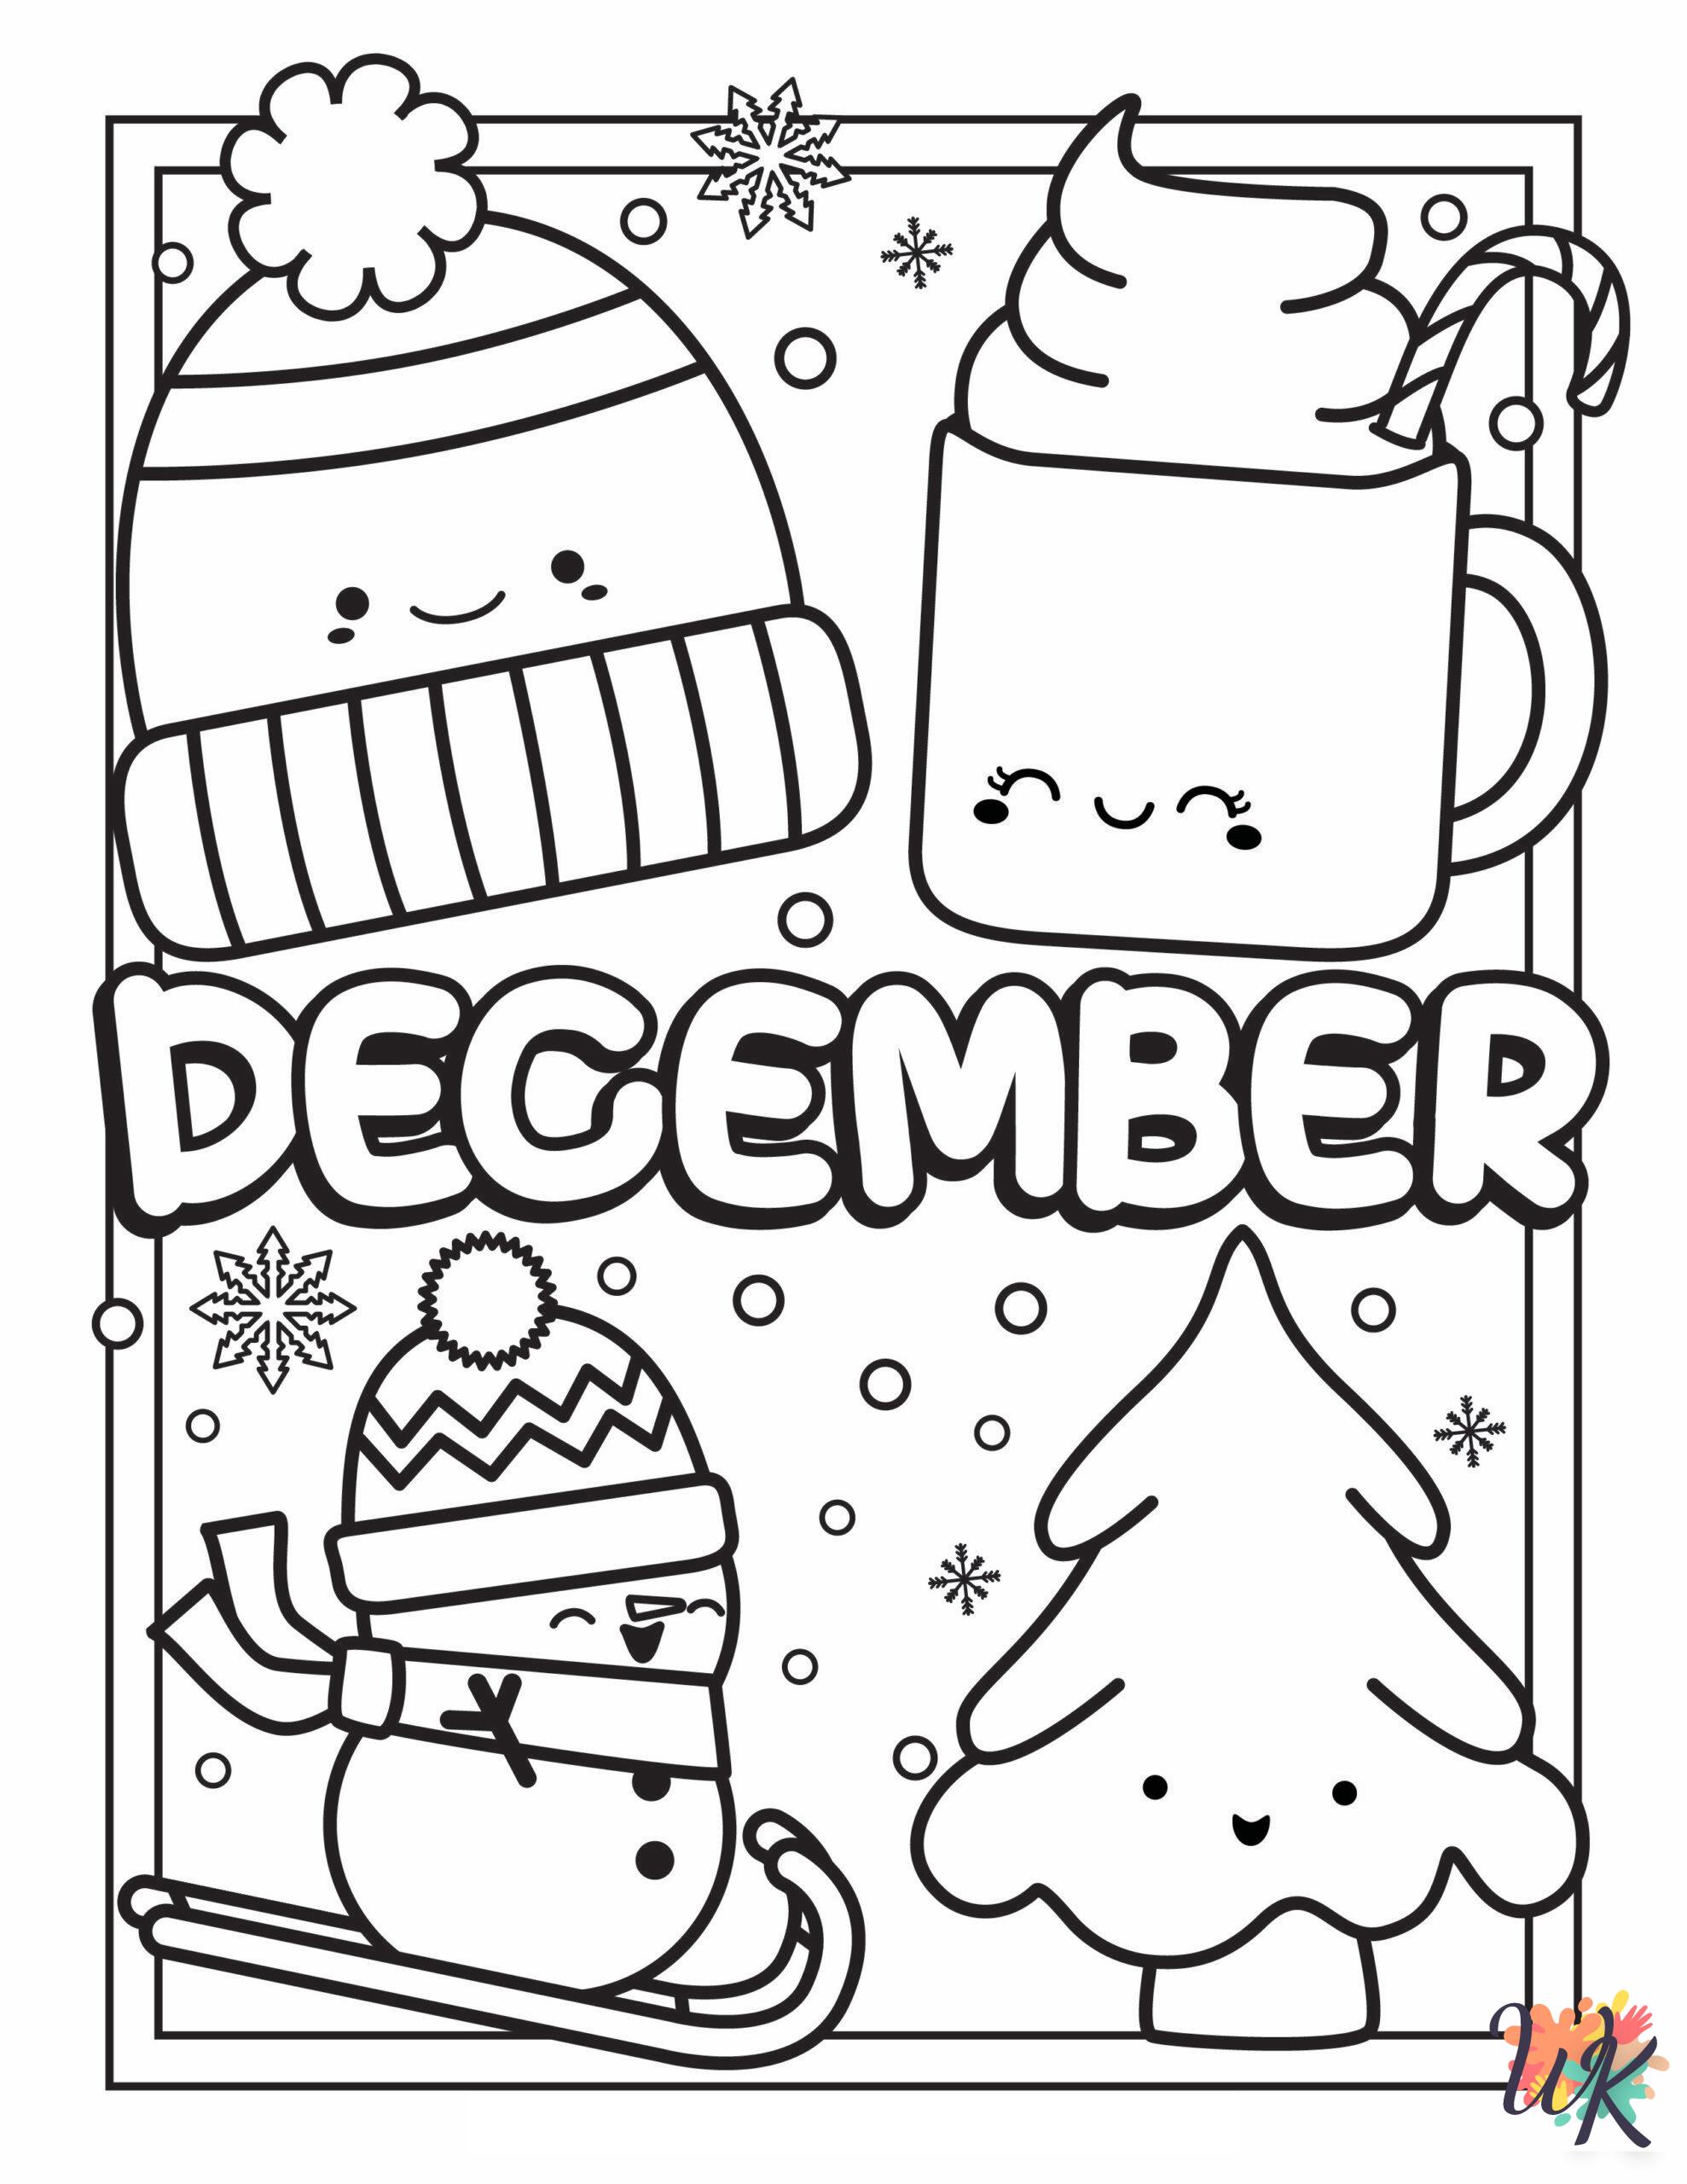 December coloring pages easy